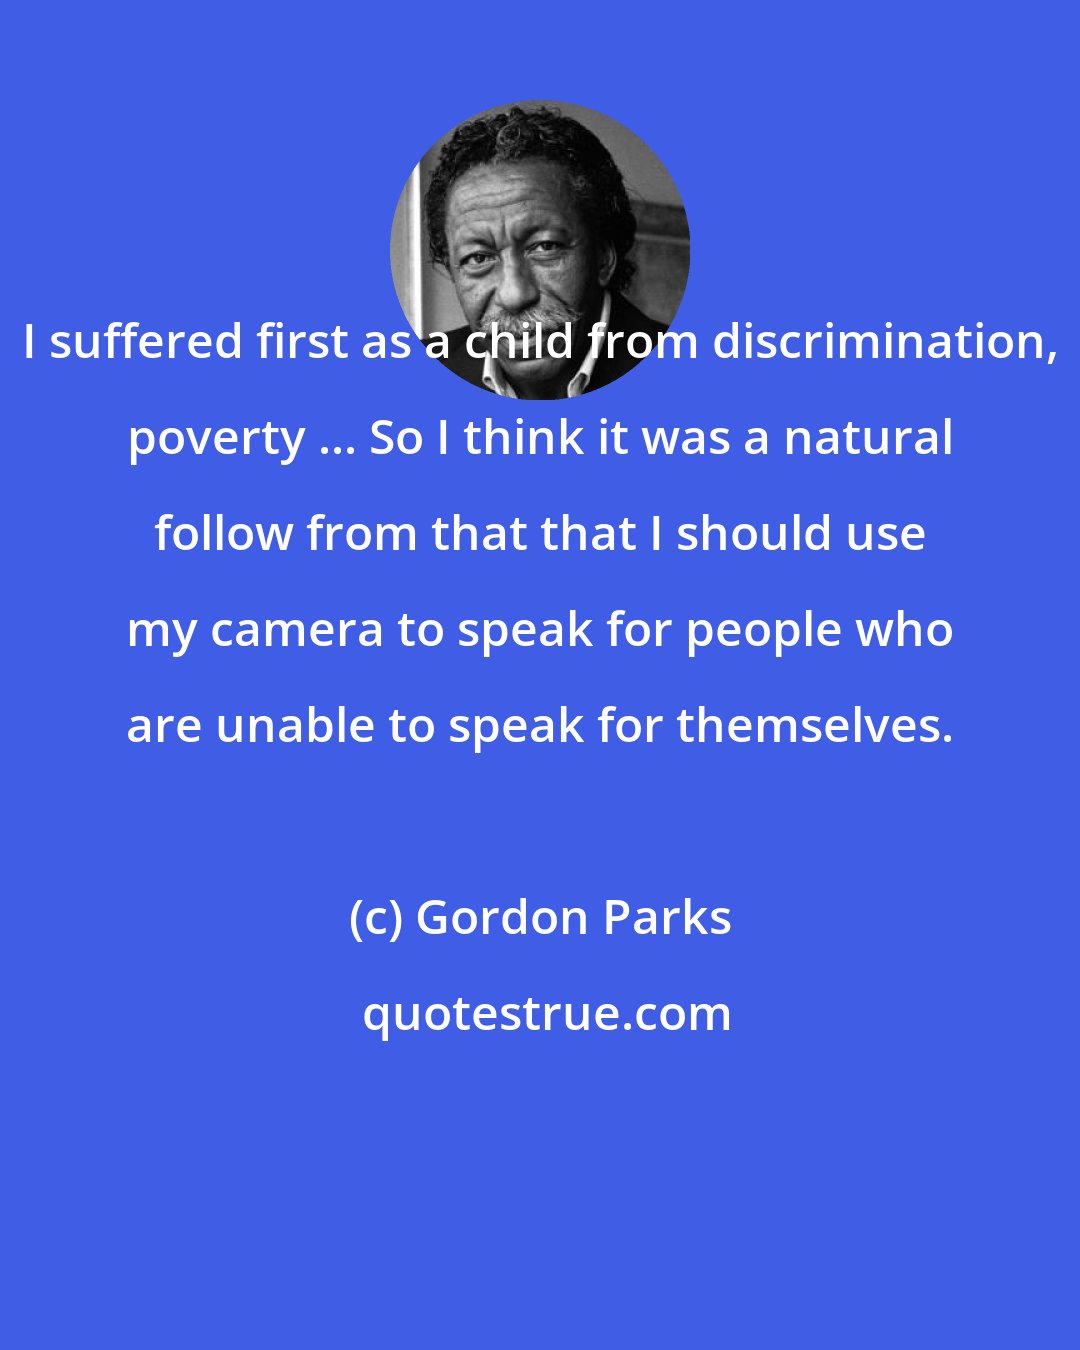 Gordon Parks: I suffered first as a child from discrimination, poverty ... So I think it was a natural follow from that that I should use my camera to speak for people who are unable to speak for themselves.